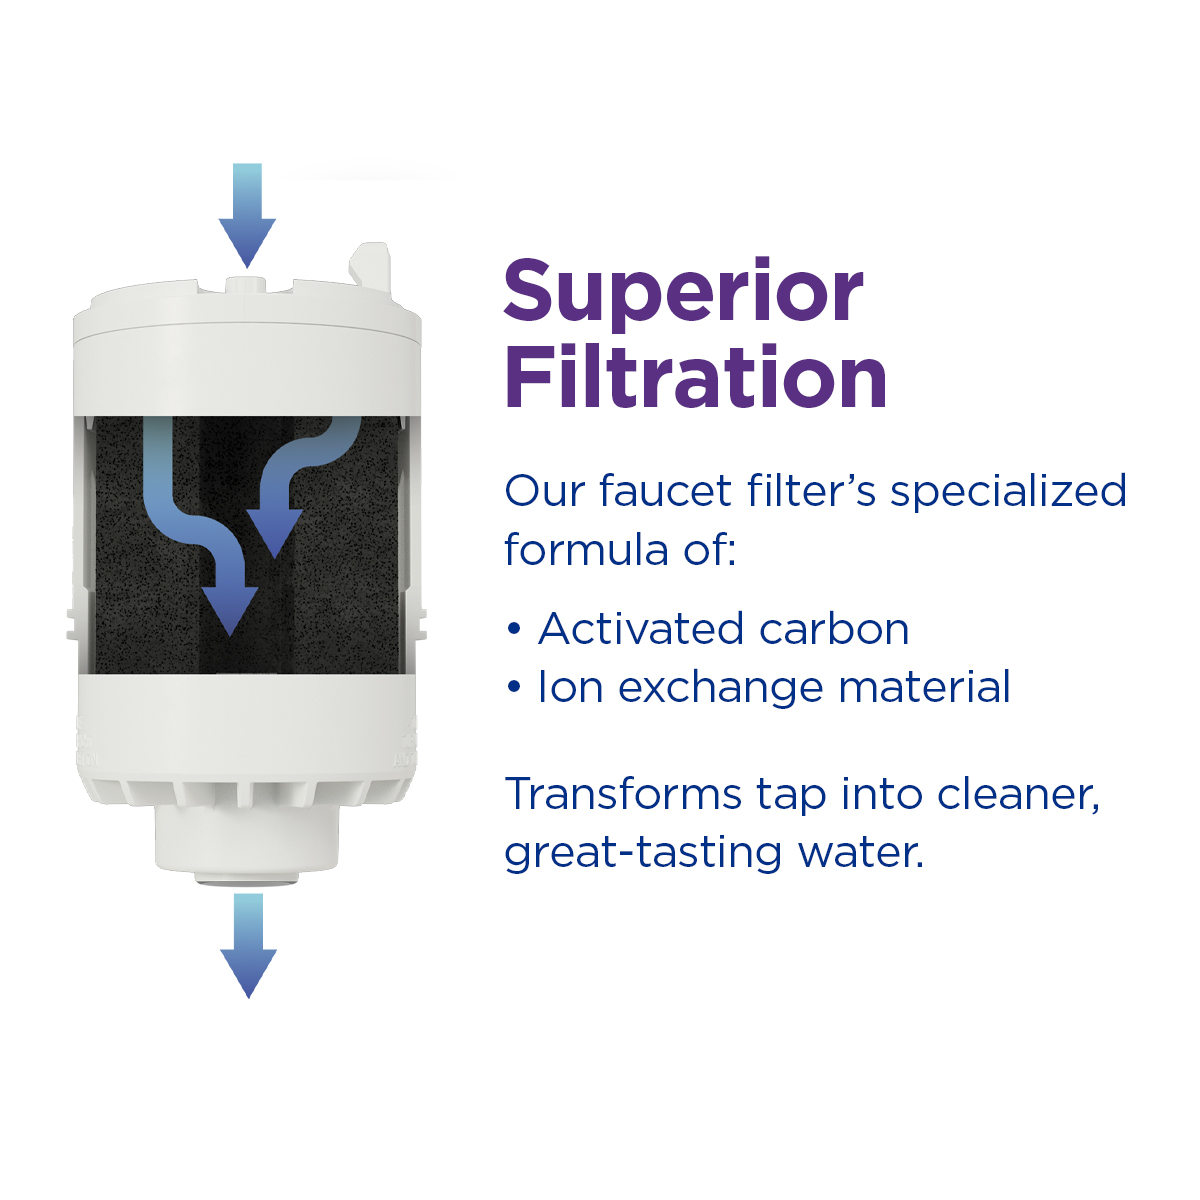 PUR Faucet Mount Water Filtration System, Vertical, White, FM3333B - image 3 of 10